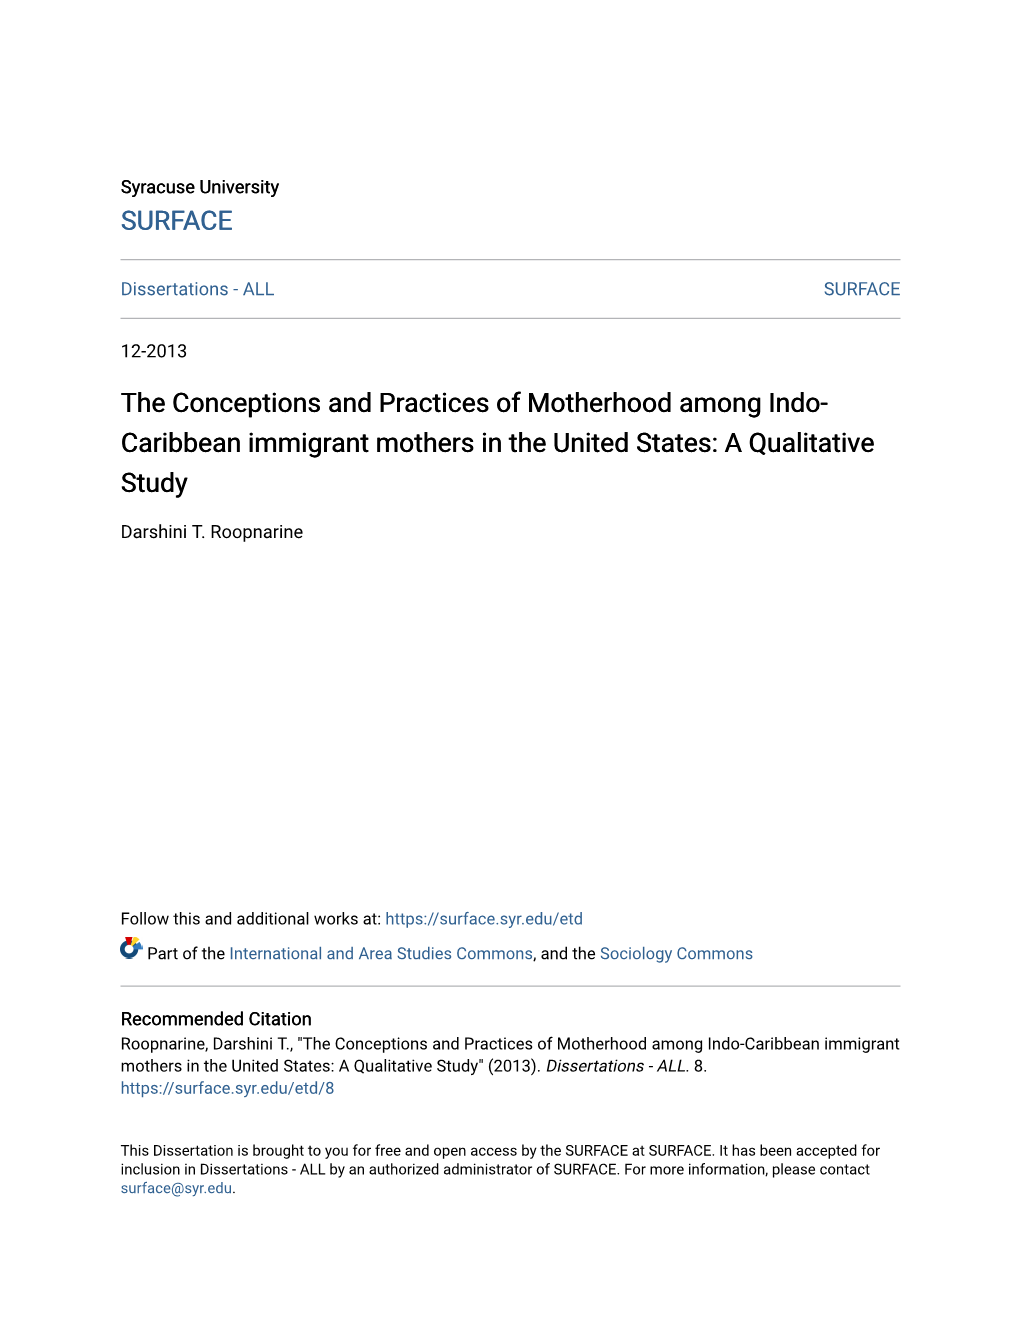 The Conceptions and Practices of Motherhood Among Indo- Caribbean Immigrant Mothers in the United States: a Qualitative Study